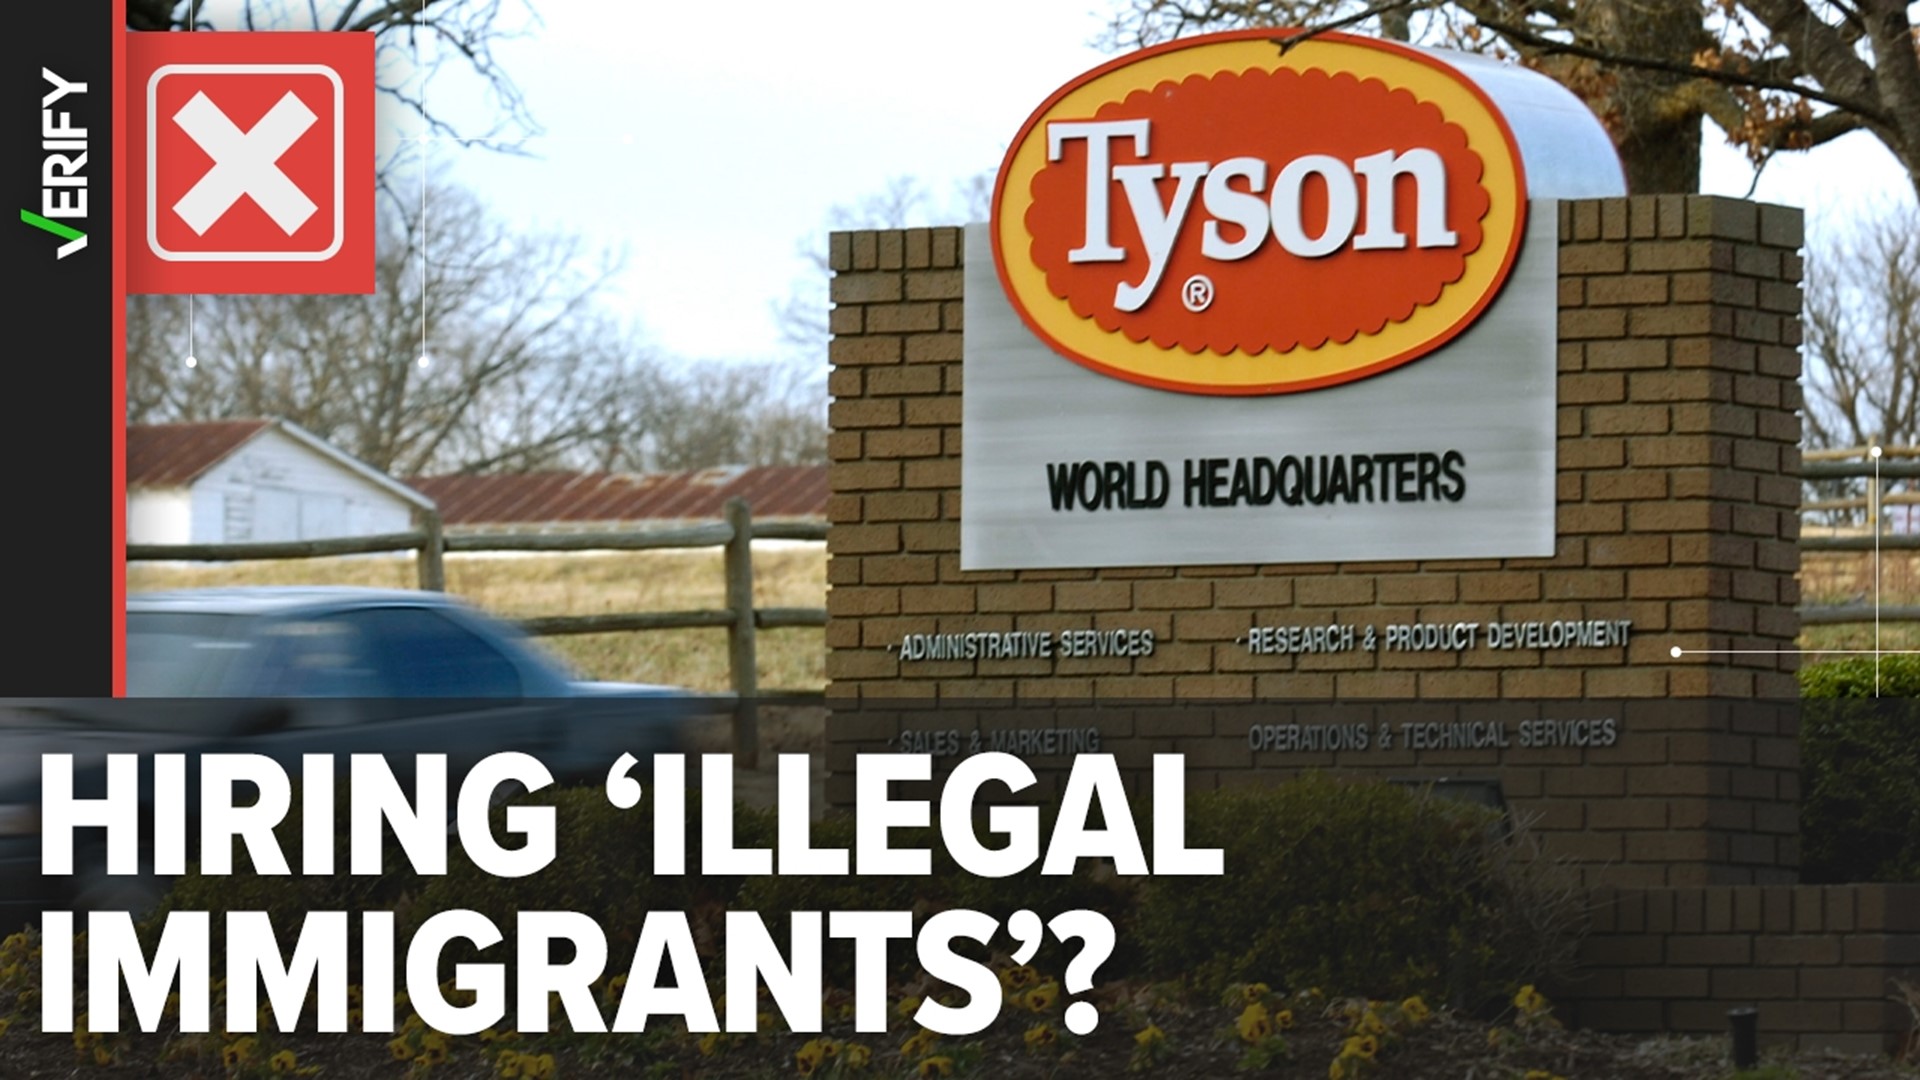 Tyson Foods not hiring ‘illegal immigrants’